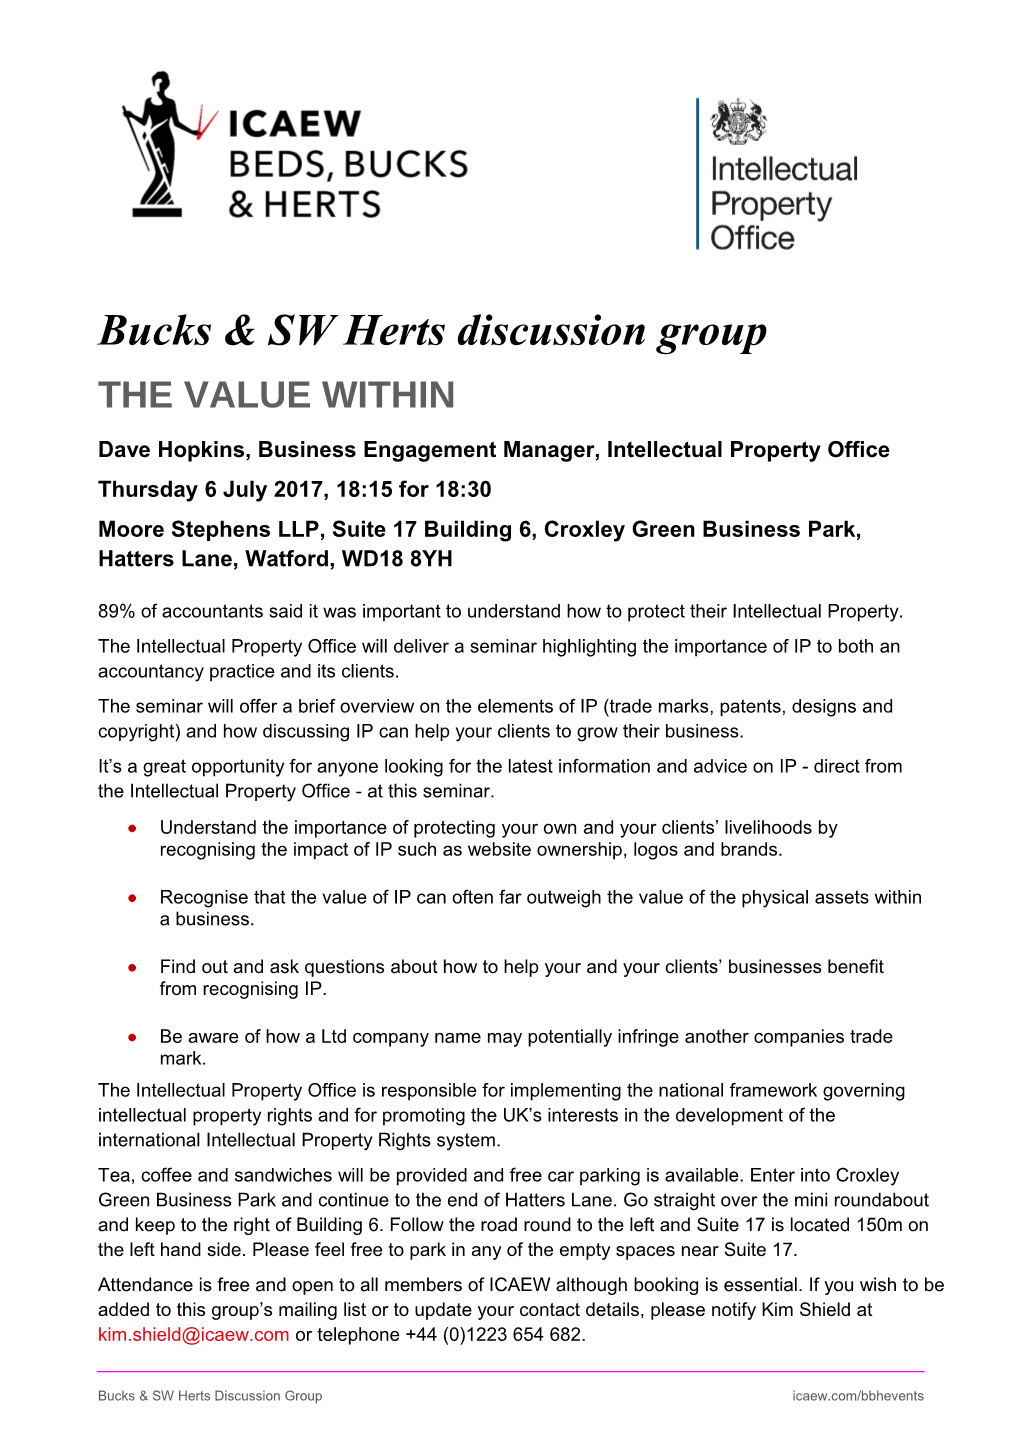 Bucks & SW Herts Discussion Group